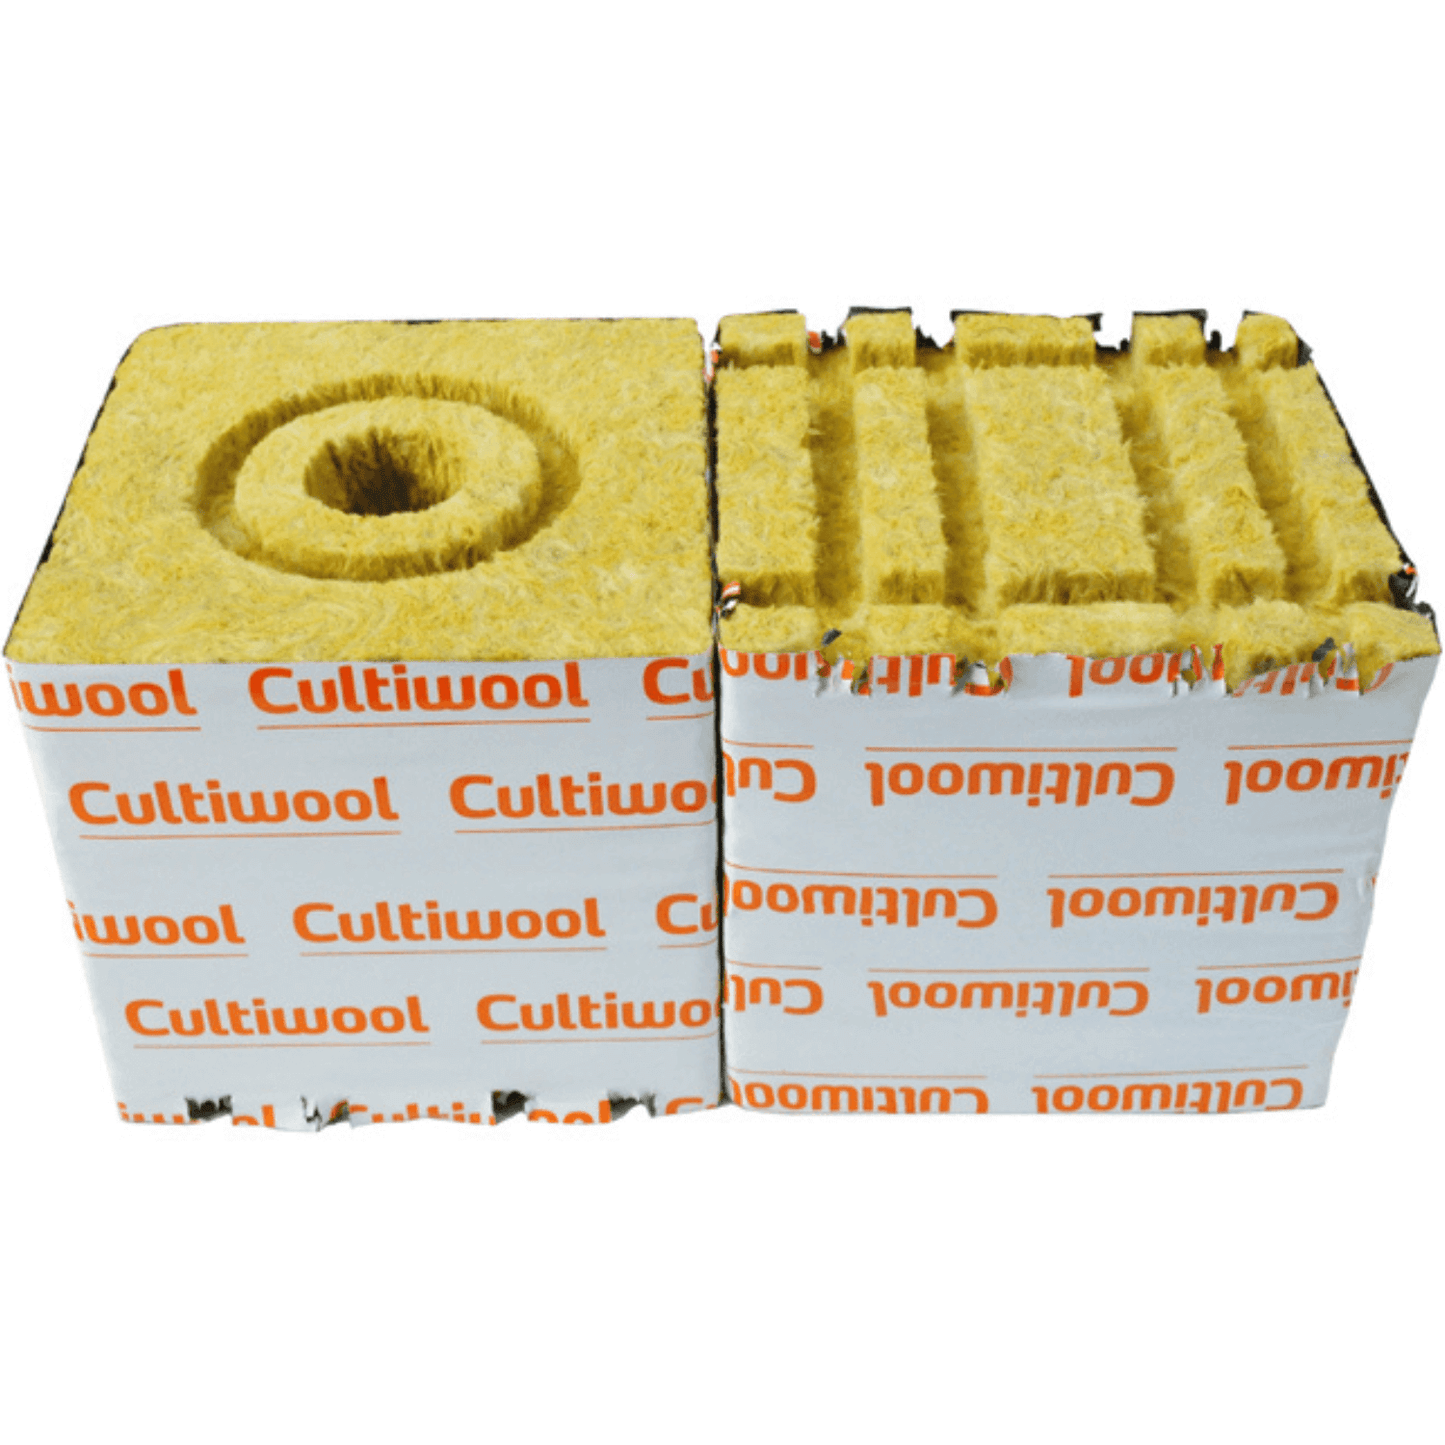 Cultiwool 6" x 6" x 6" Blocks of Cultilene Rockwool with Optidrain and Donut Rings - Case of 48 CUL667 Planting & Watering